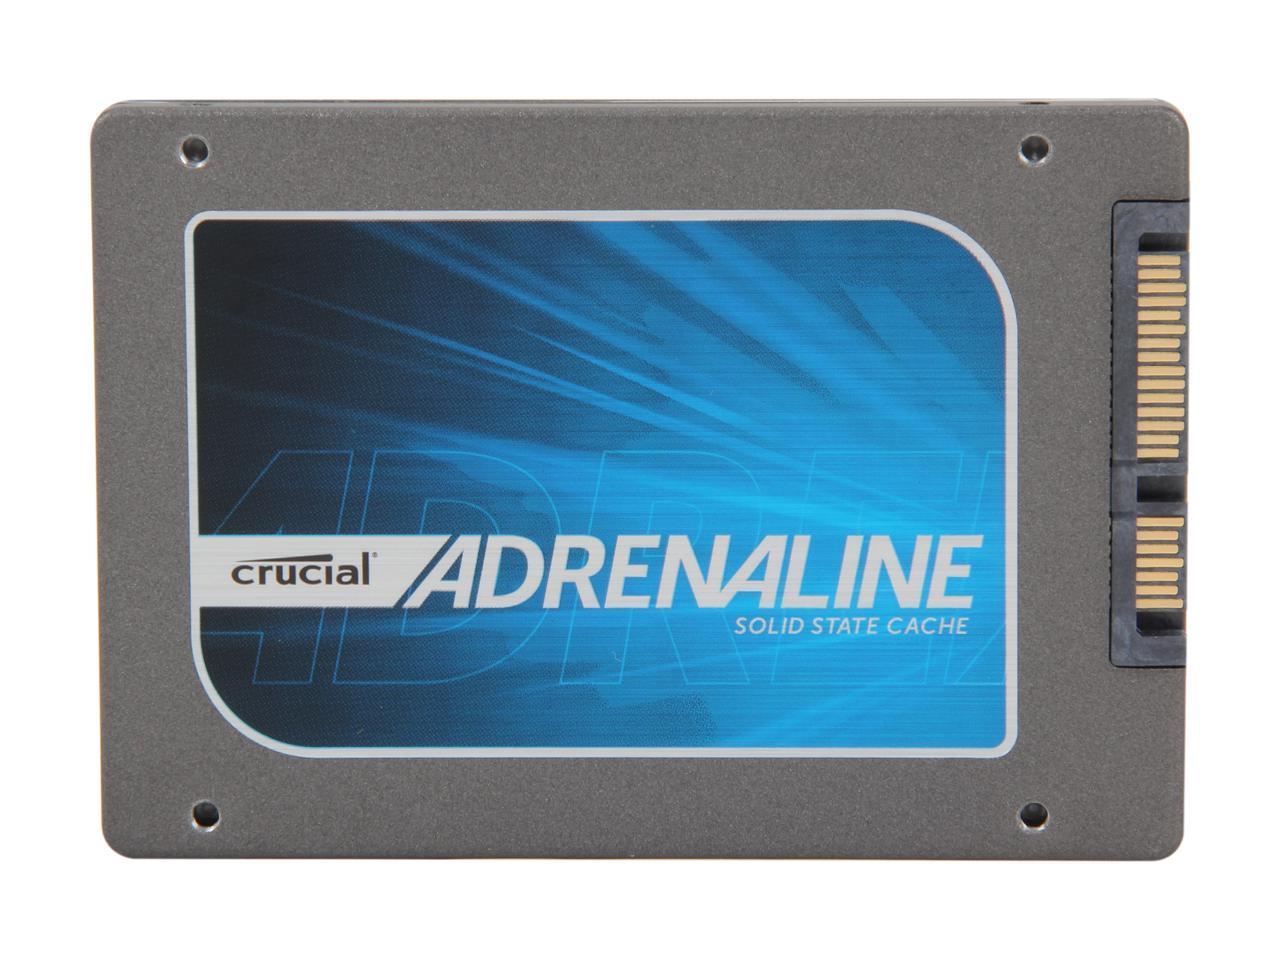 Crucial Adrenaline CT050M4SSC2BDA 50GB Solid State Cache for Windows 7-based PCs